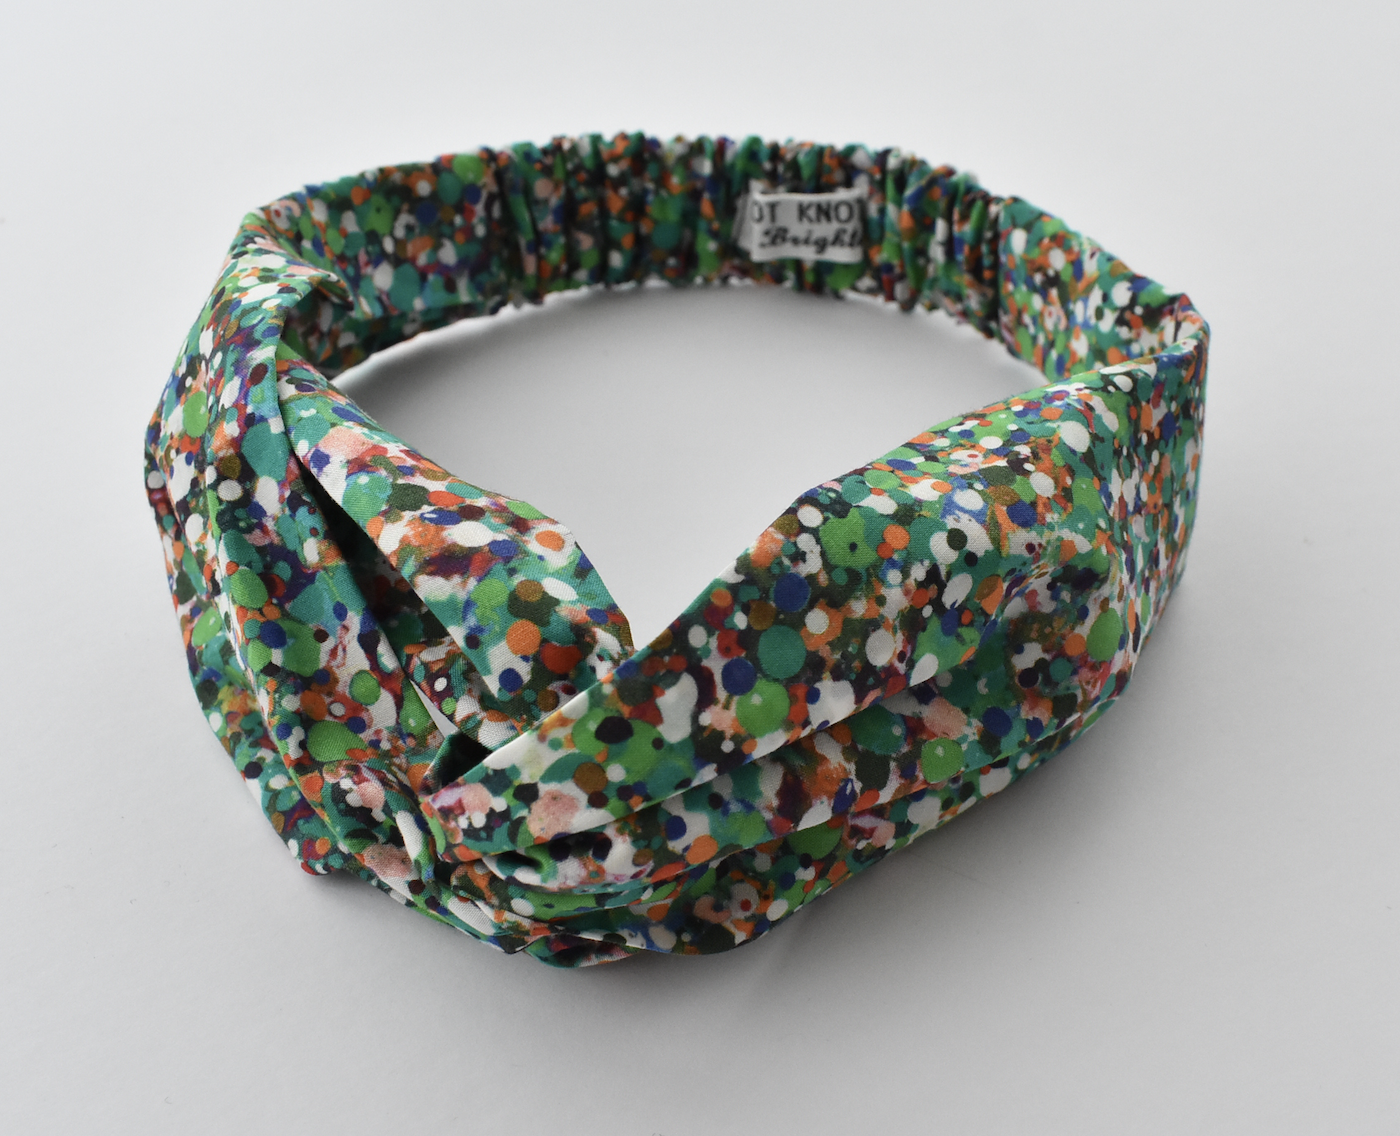 Kids Tot Knot Twisted hairband - Green Reflections Liberty of London print - Tot Knots of Brighton